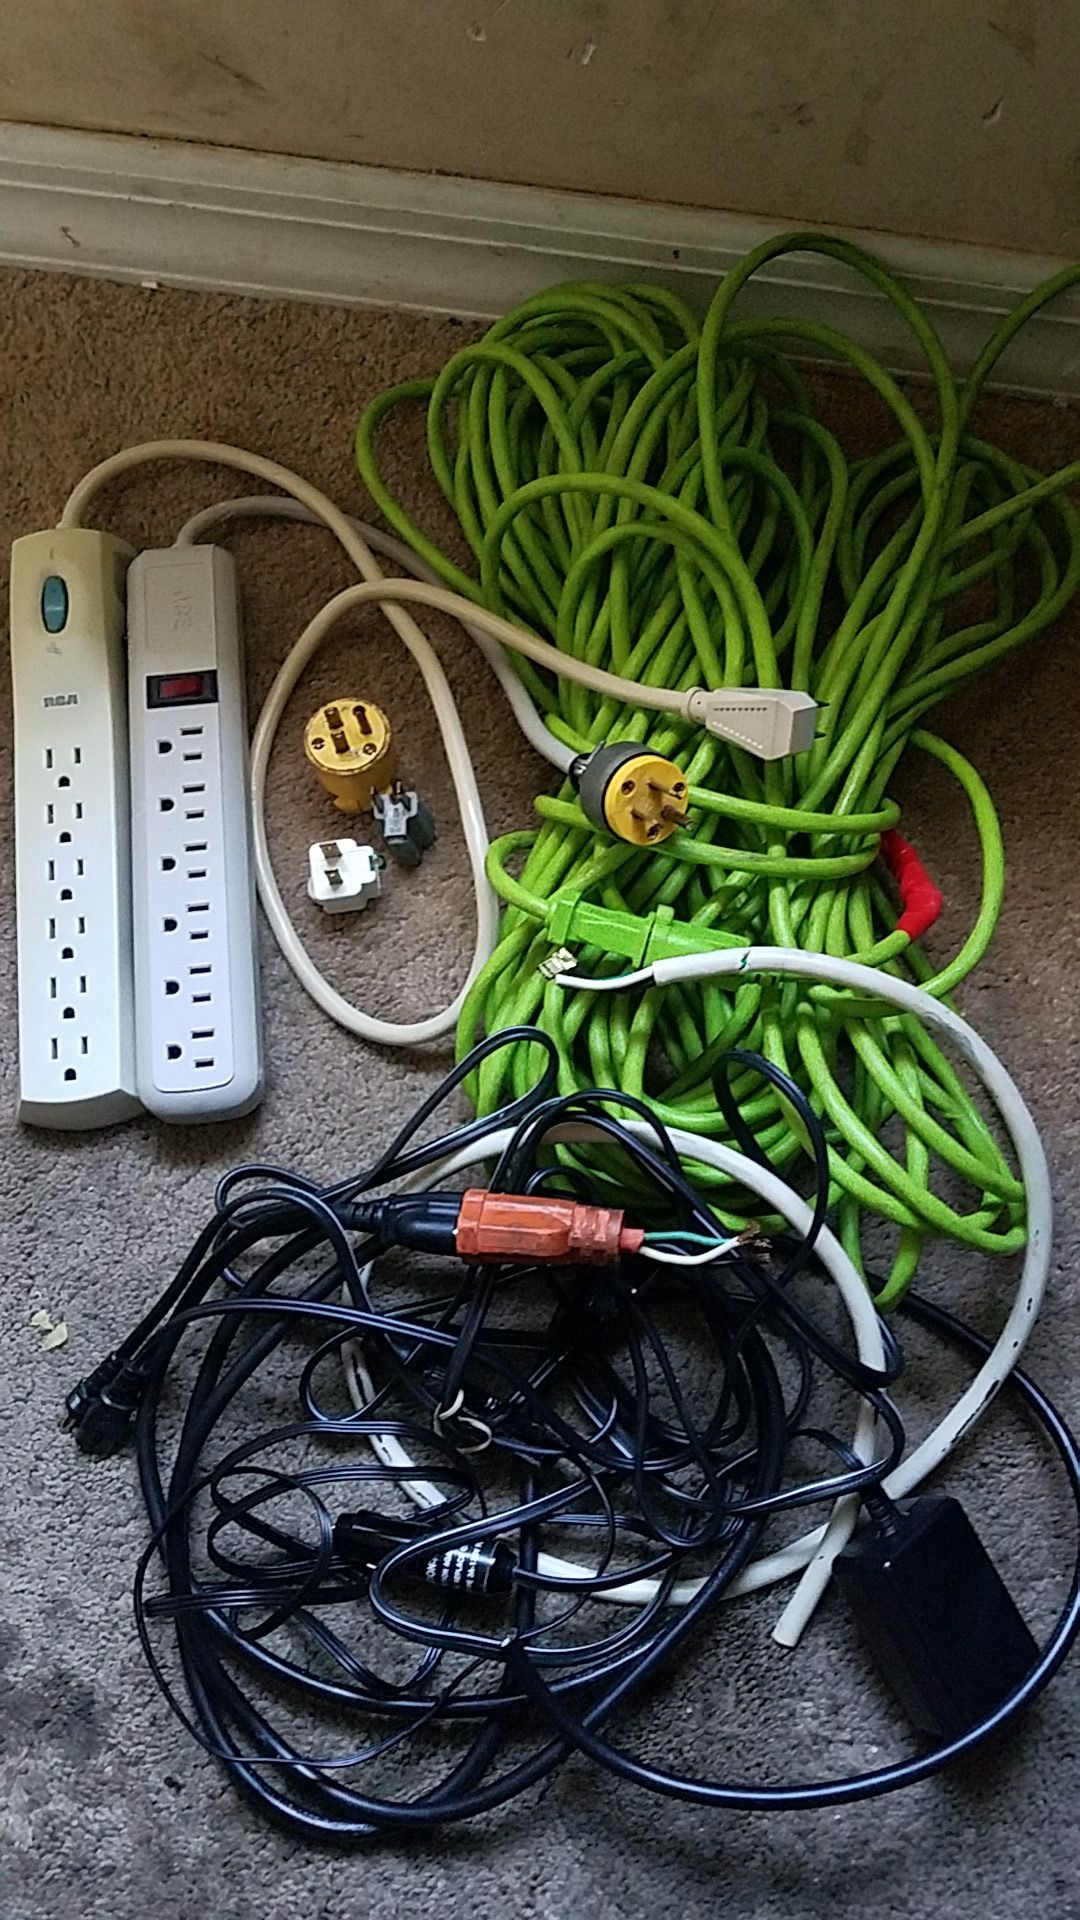 ***FREE ELECTRICAL ITEMS***